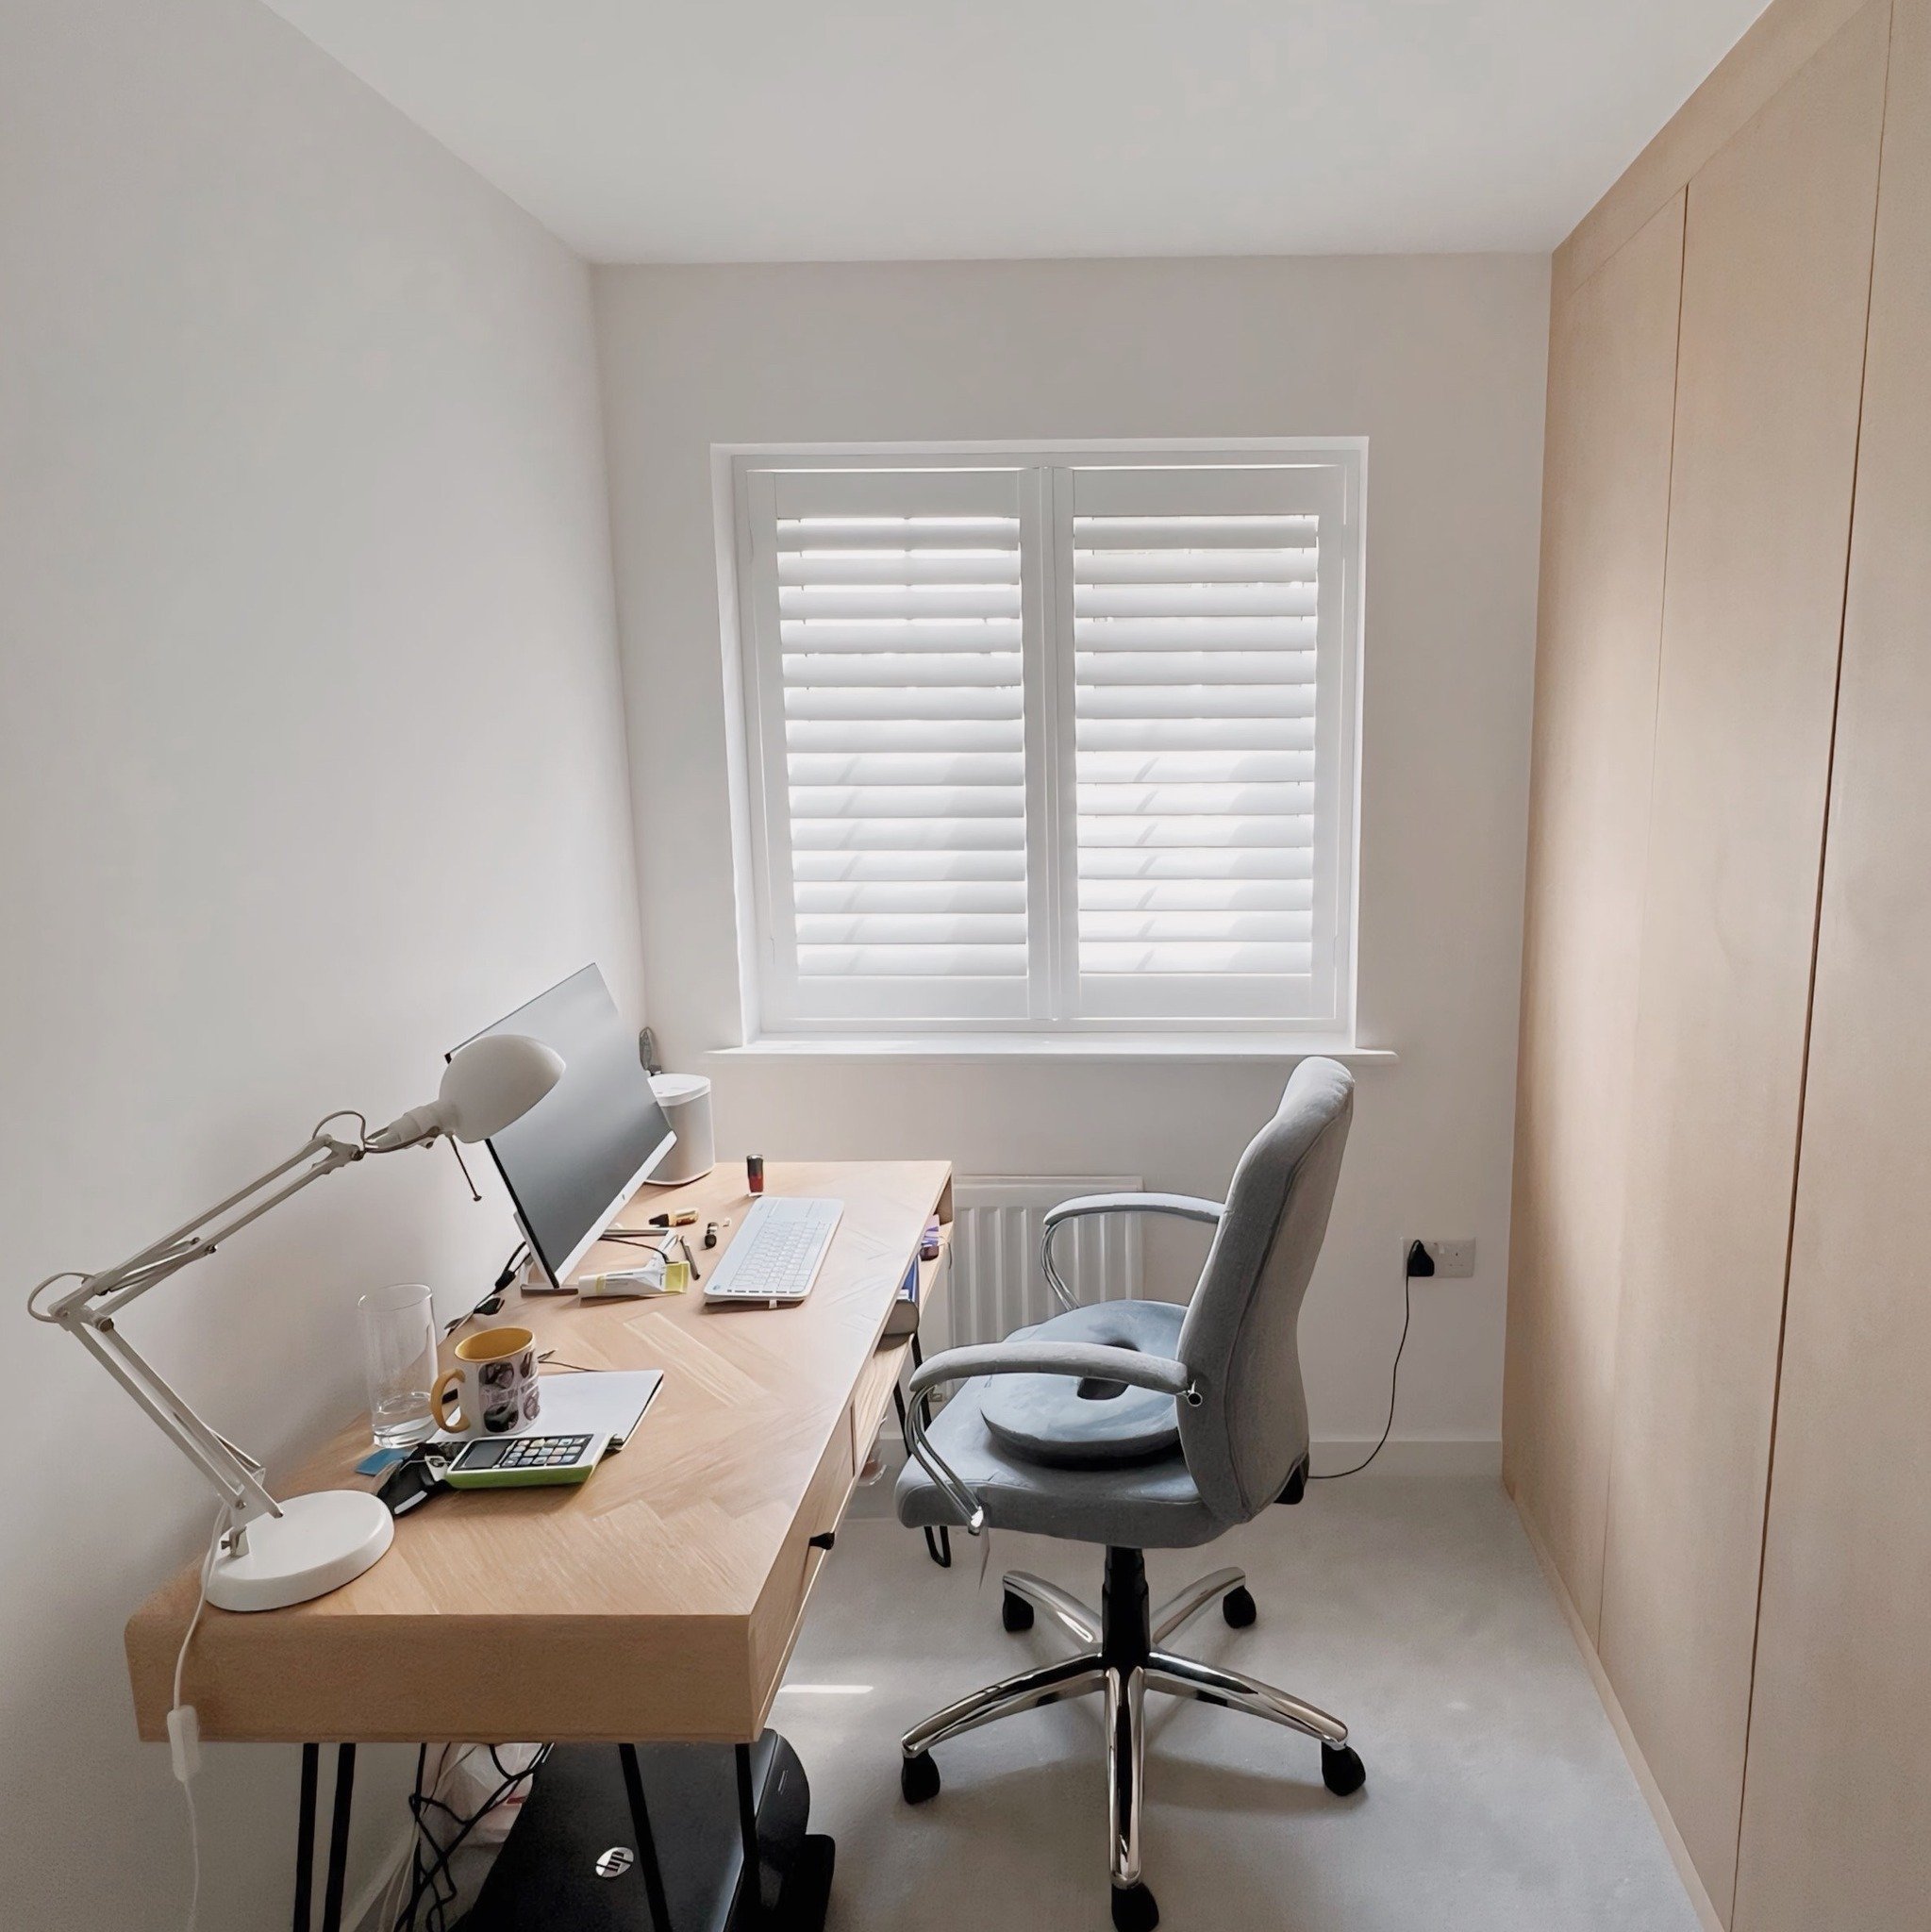 Office Upgrade Alert! Our Full Height Shutters Are Not Just a Stylish Addition to Your Workspace; They're a Game-Changer for Productivity and Comfort. 

With our Hidden Control Split Feature, you Have The Power to Adjust The Slats, Letting in Just Th